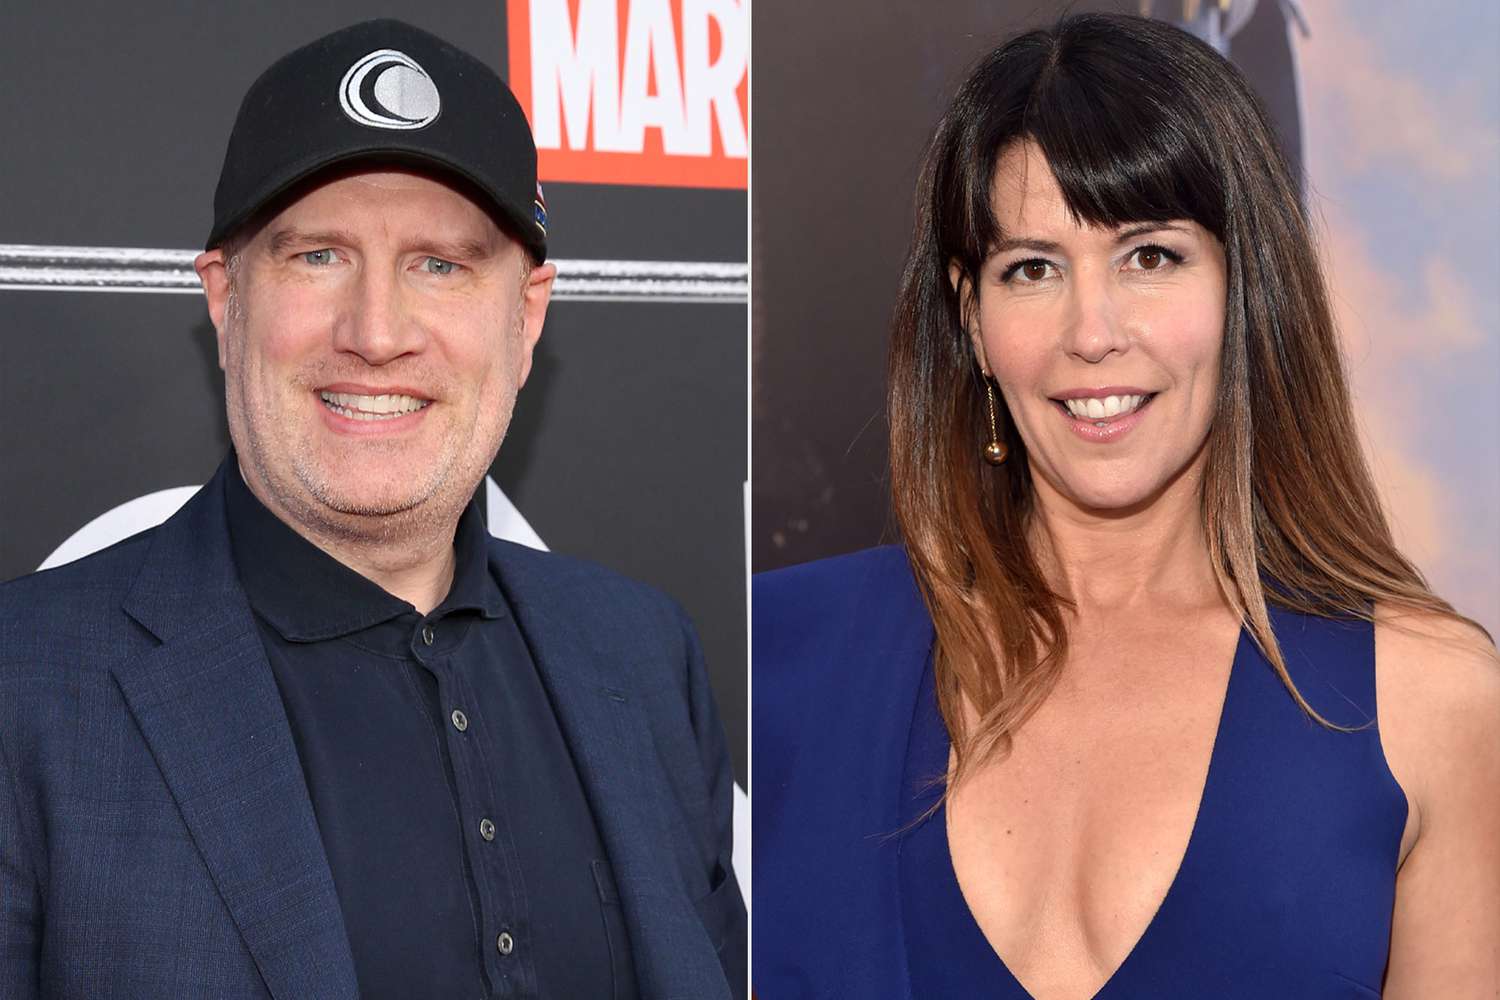 Kevin Feige, Patty Jenkins Star Wars movies are reportedly dead | EW.com